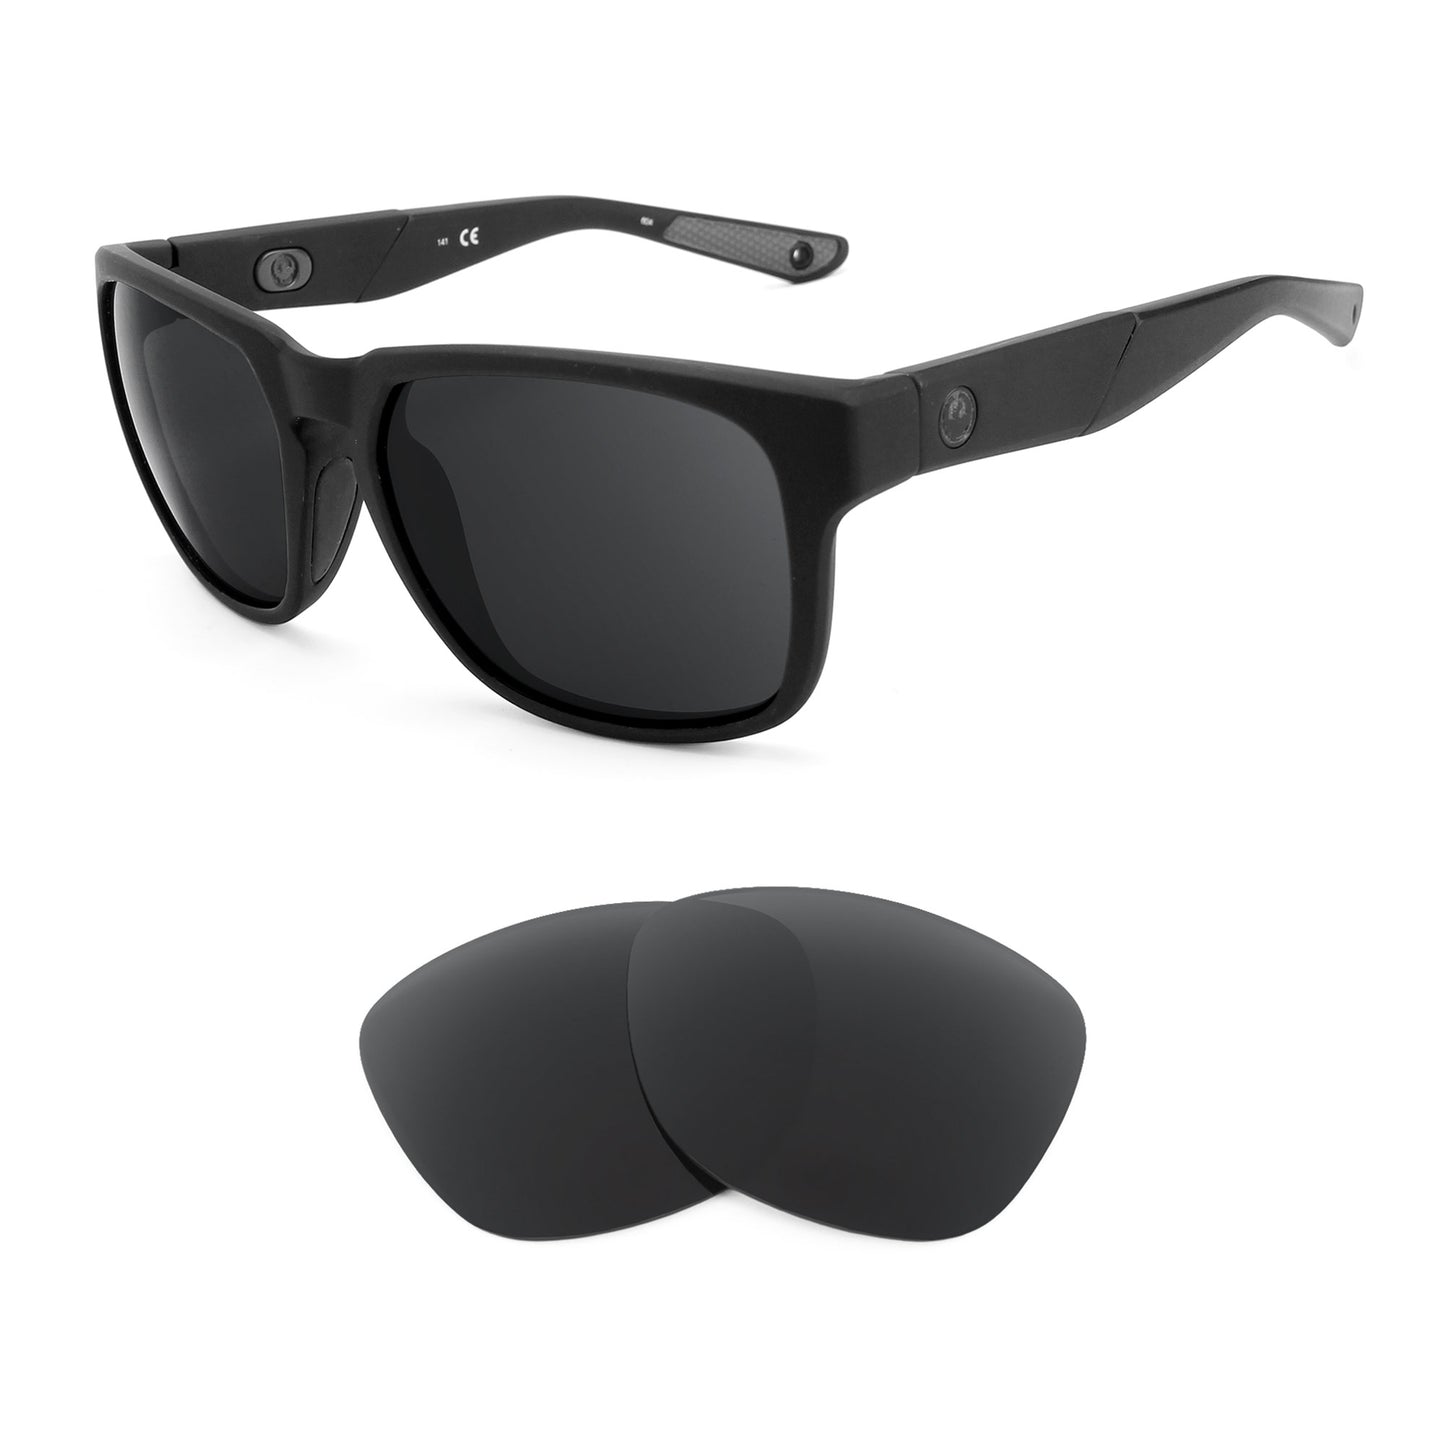 Dragon MountaineerX sunglasses with replacement lenses